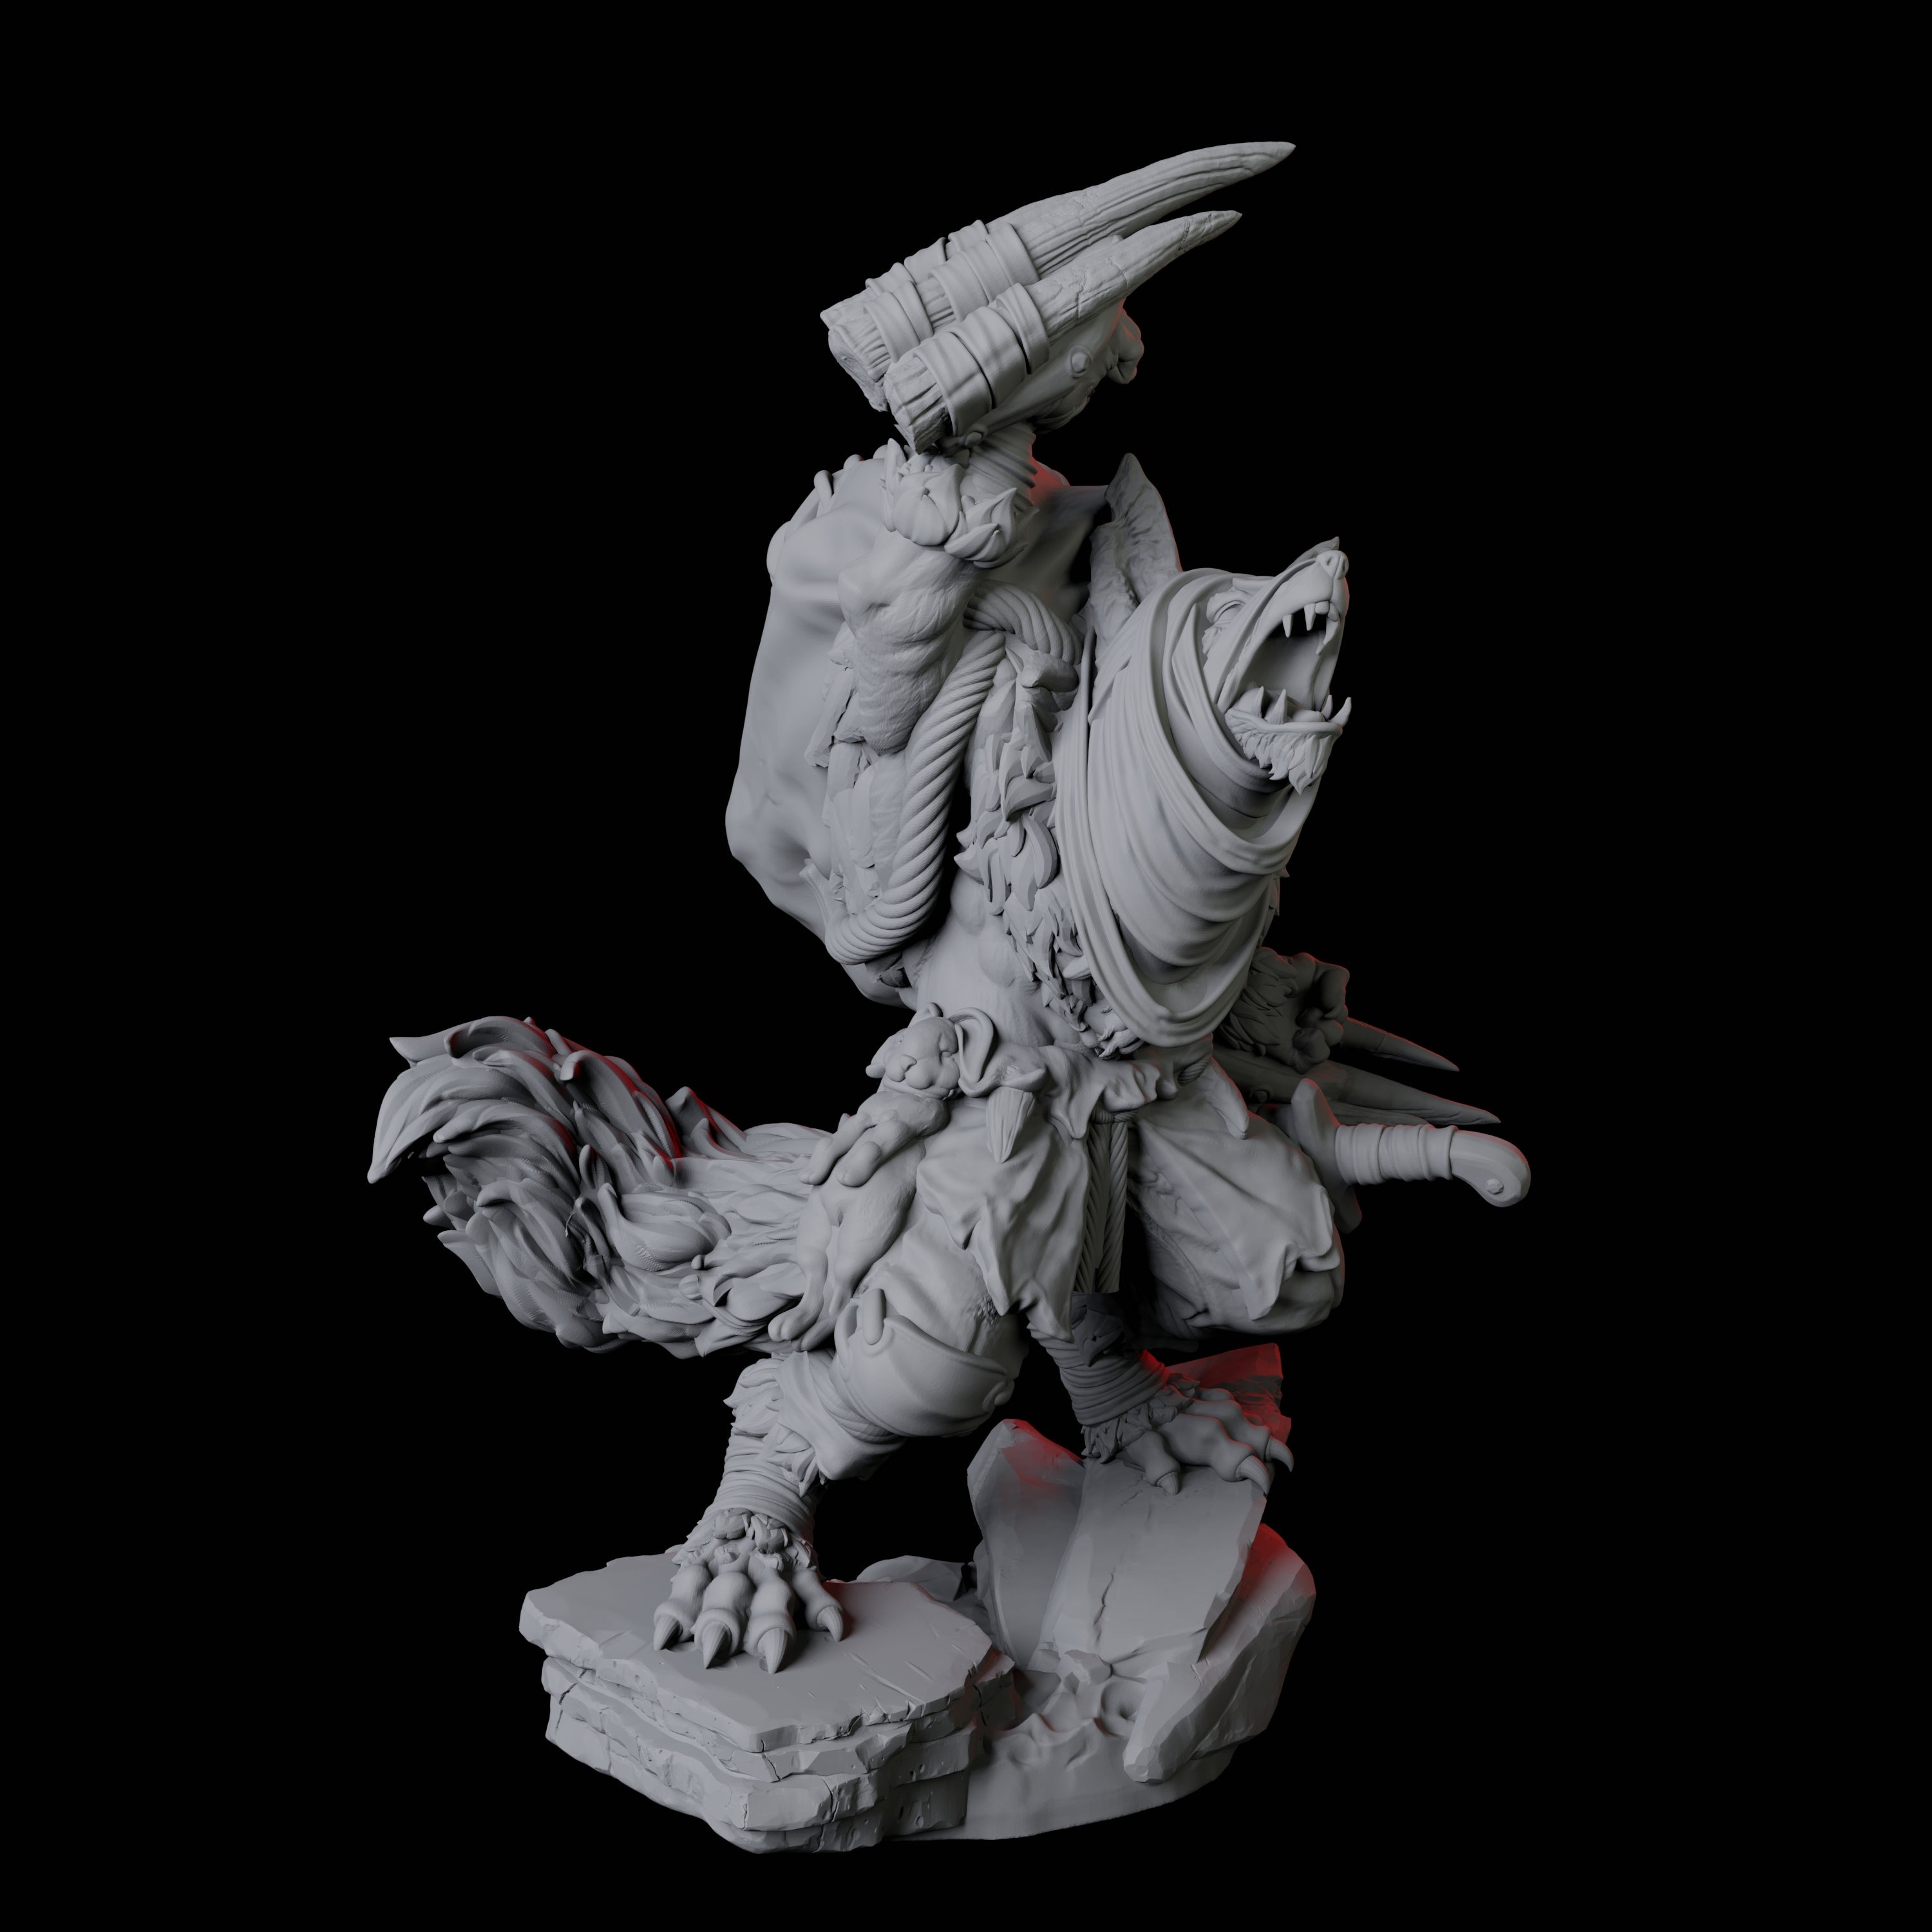 Cunning Kitsune Fighter C Miniature for Dungeons and Dragons, Pathfinder or other TTRPGs